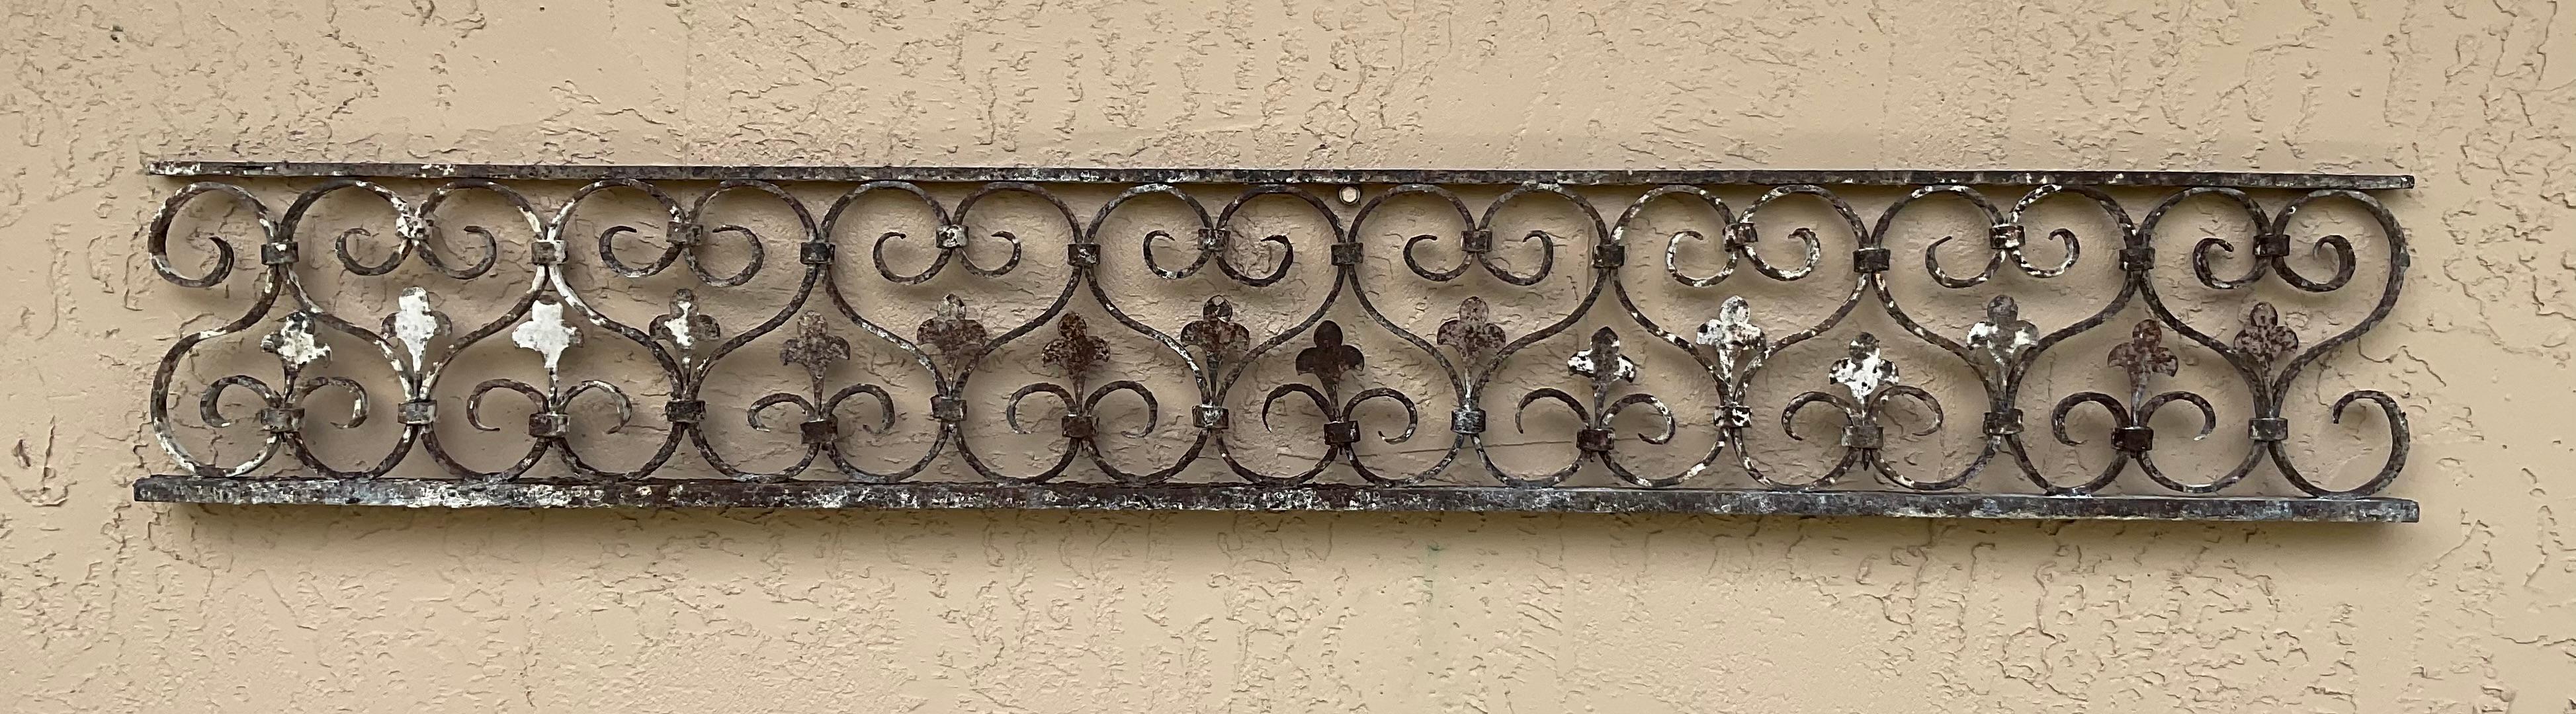 Elegant wall hanging made of hand-forged and twisted iron pieces salvaged from the Mizner Era of
Palm beach Florida estate ,great attractive wall decoration.
. Treated for rust prevention